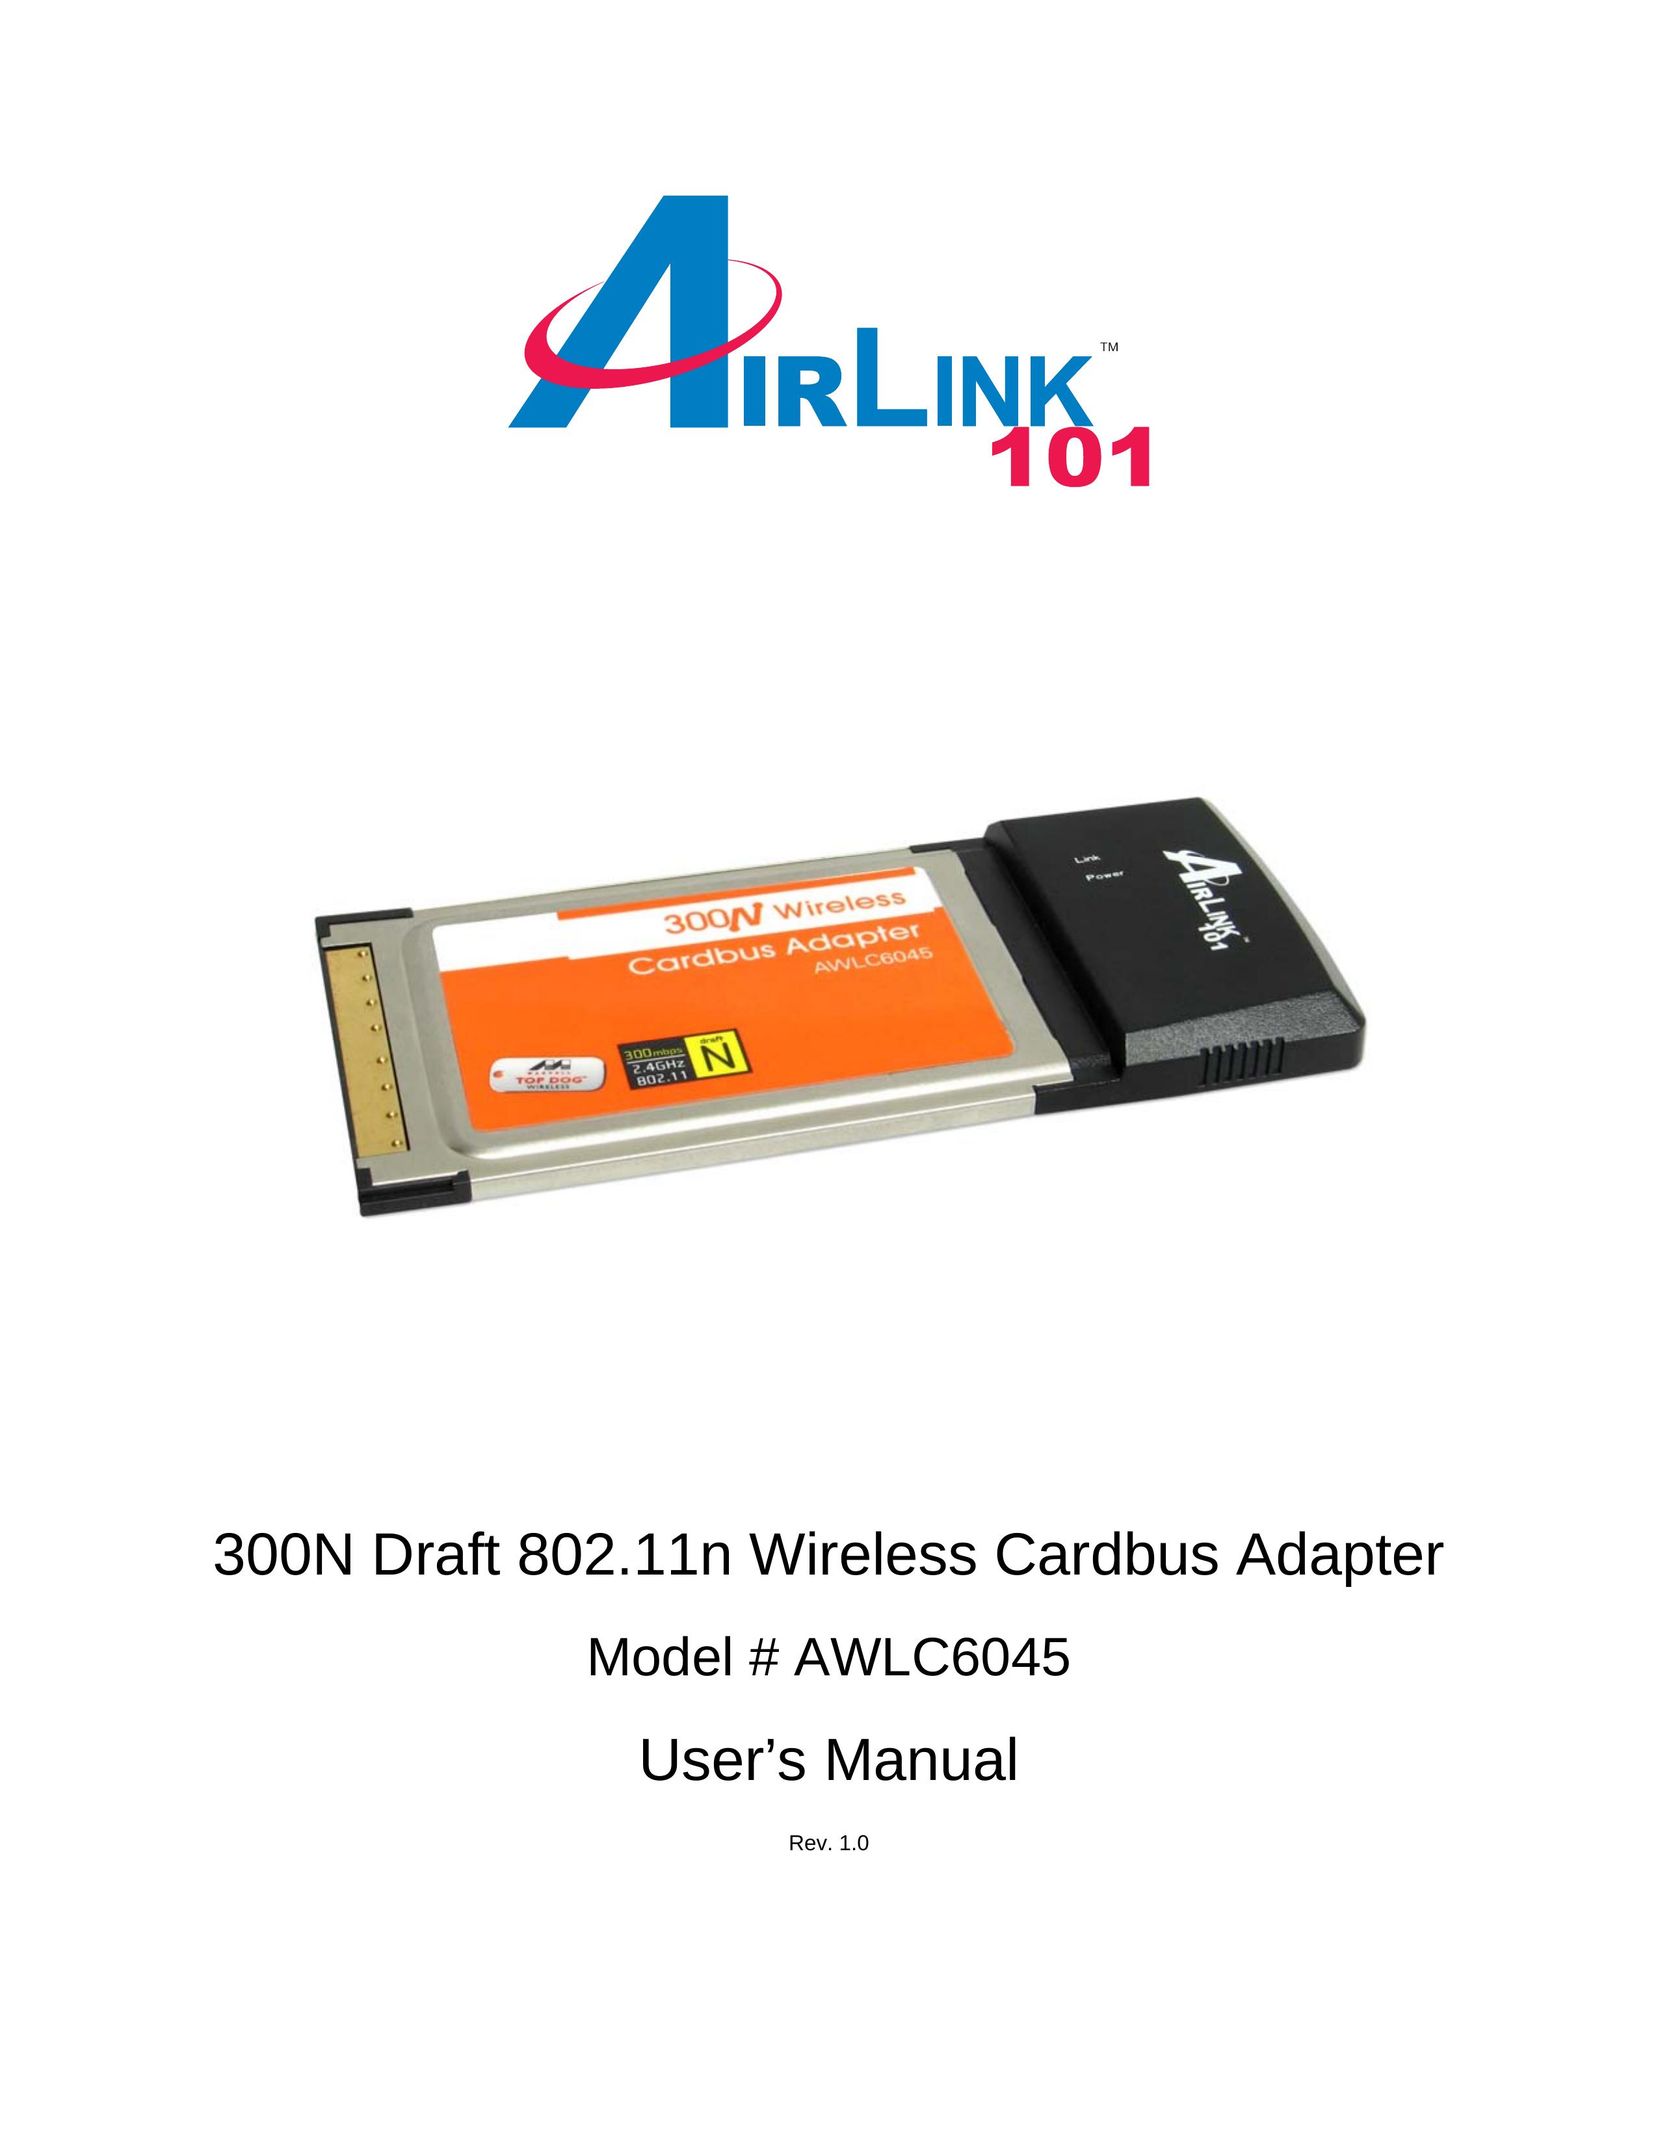 Airlink101 AWLC6045 Network Card User Manual